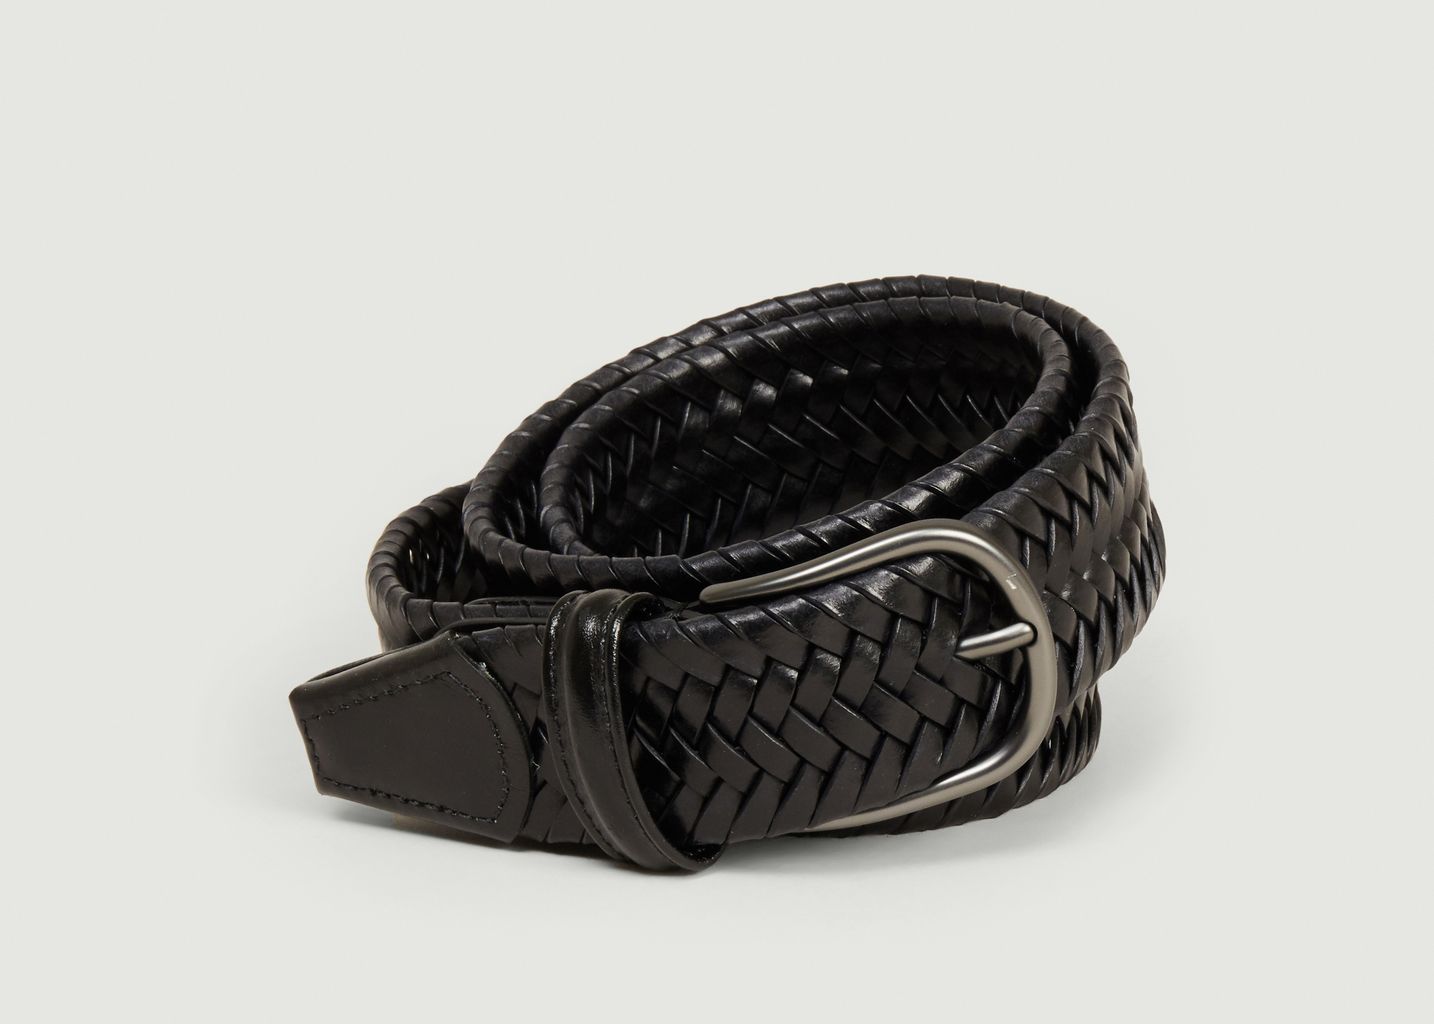 Anderson's Elasticated Braided Leather Belt